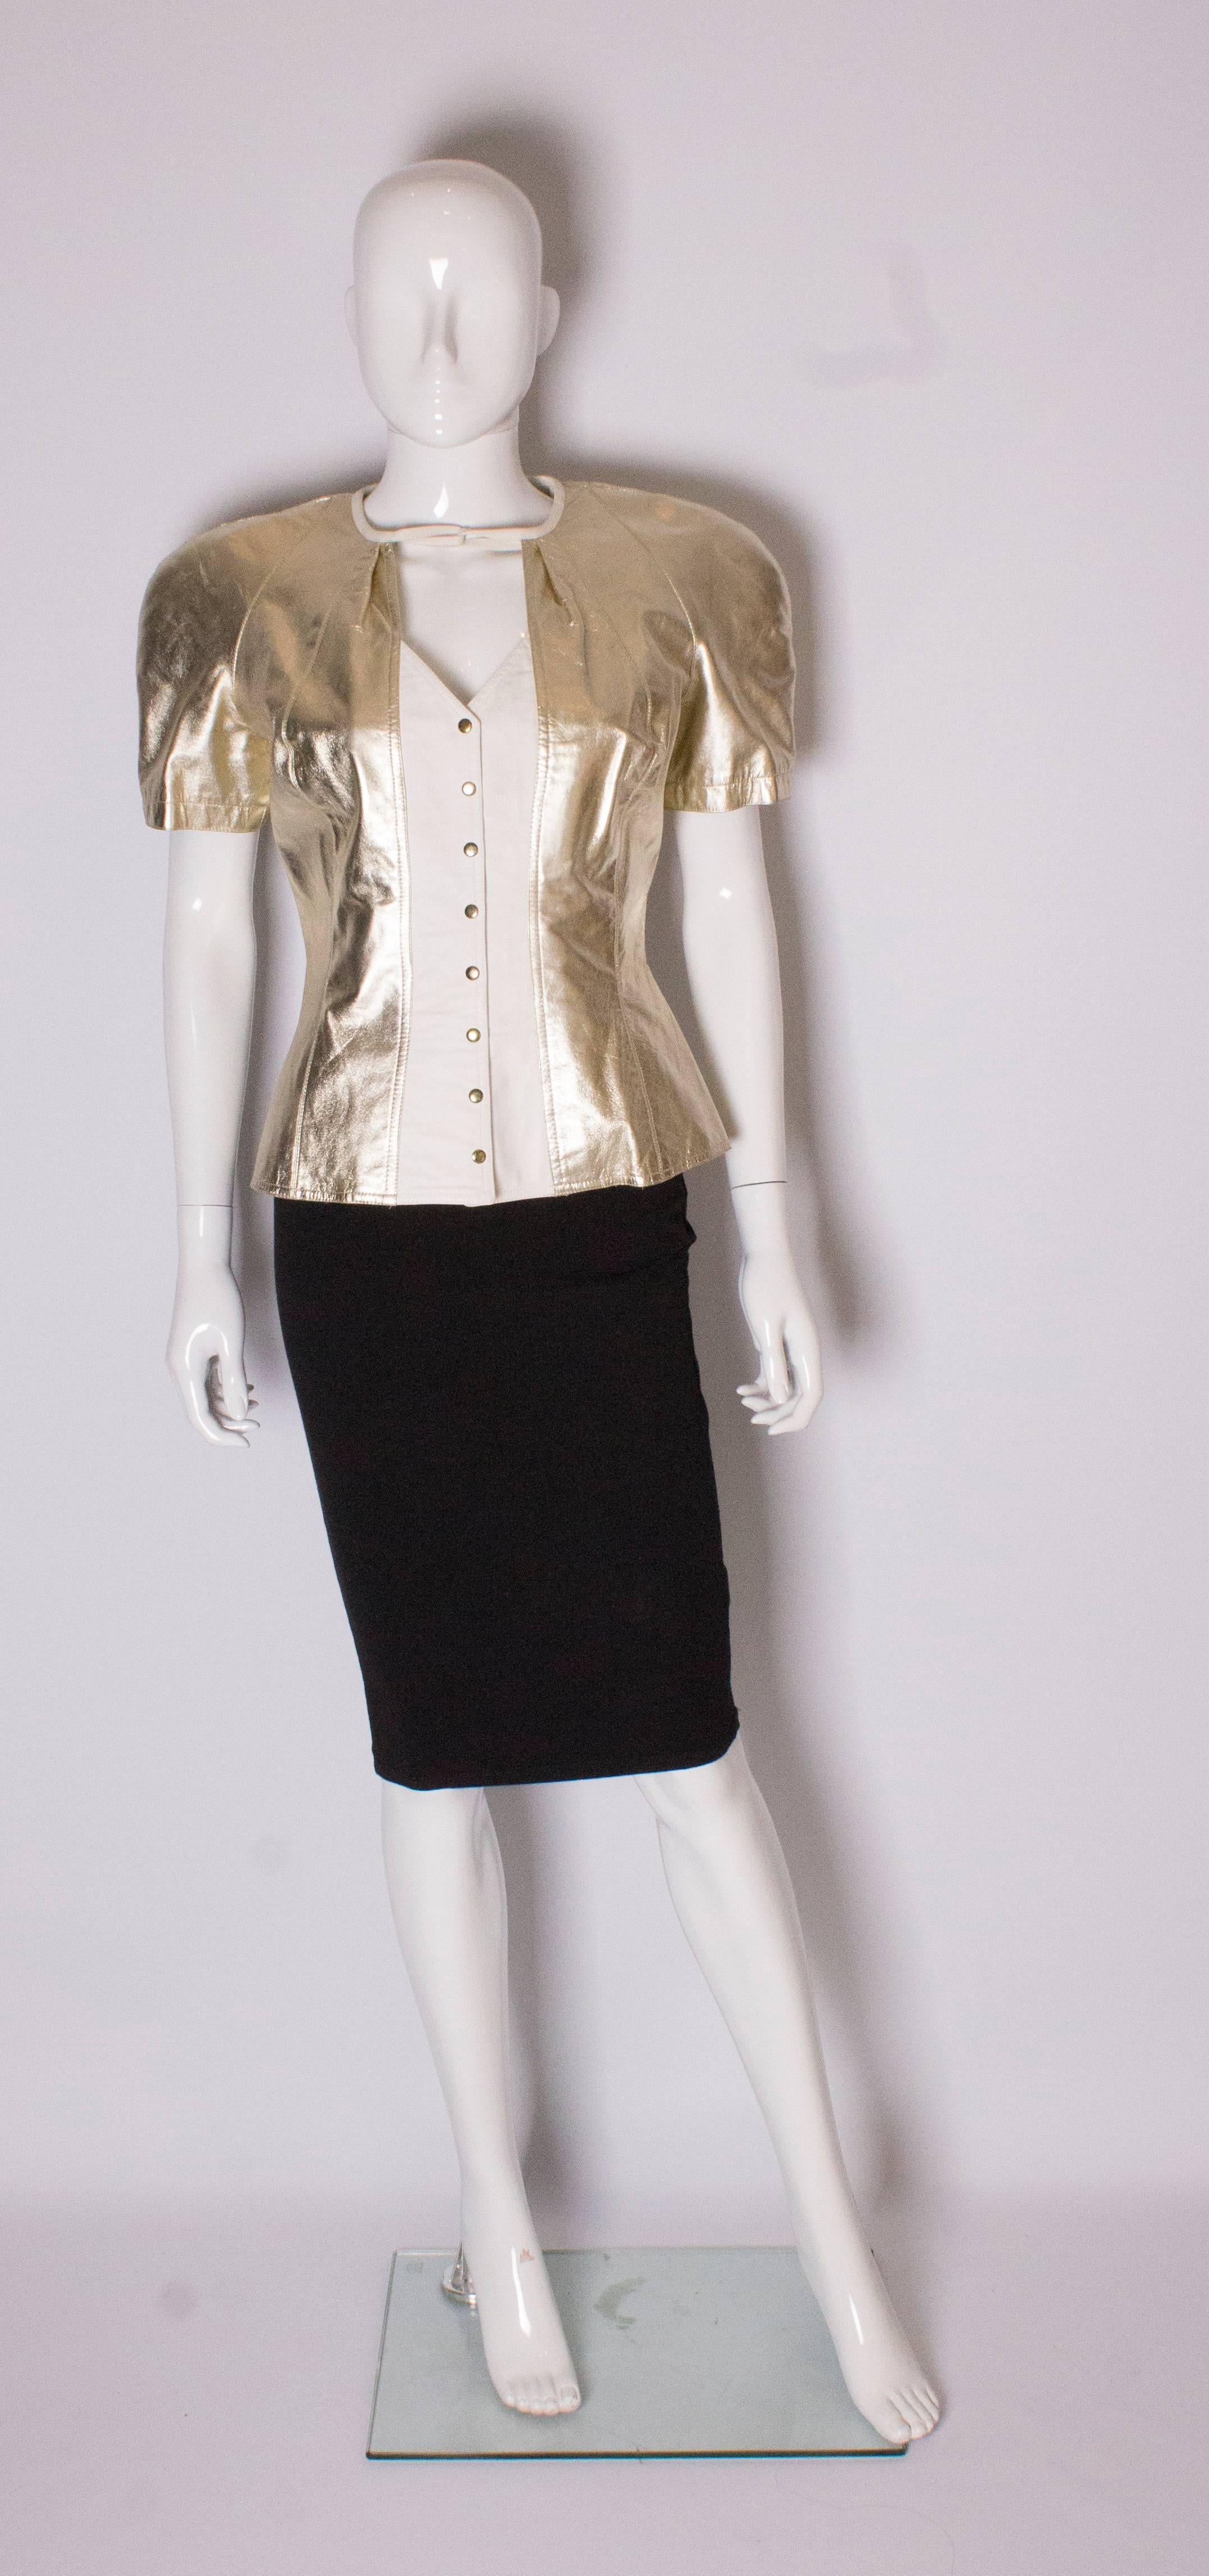 A great addition for the party season. This top /jacket is made of gold and white leather, and is fully lined. The jacket has a v neckline and hook fastenings , with a leather tie at the top of the neck which looks just as good untied or tied. It